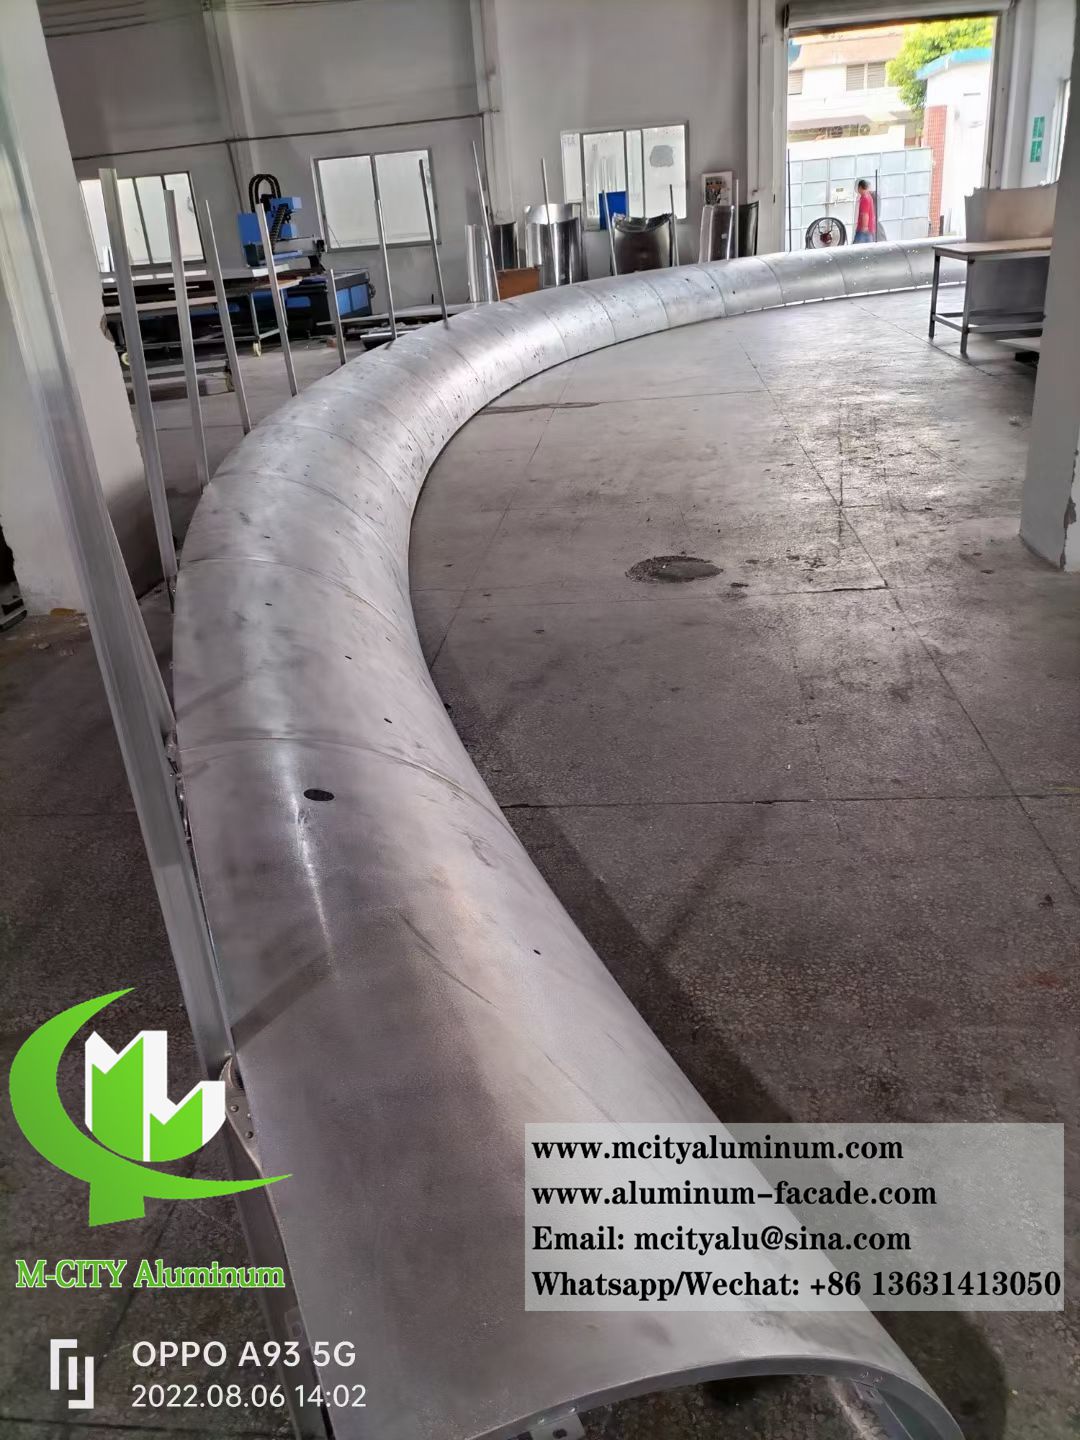 Guangdong, China Double curved Metal cladding aluminium sheet 5mm thickness 